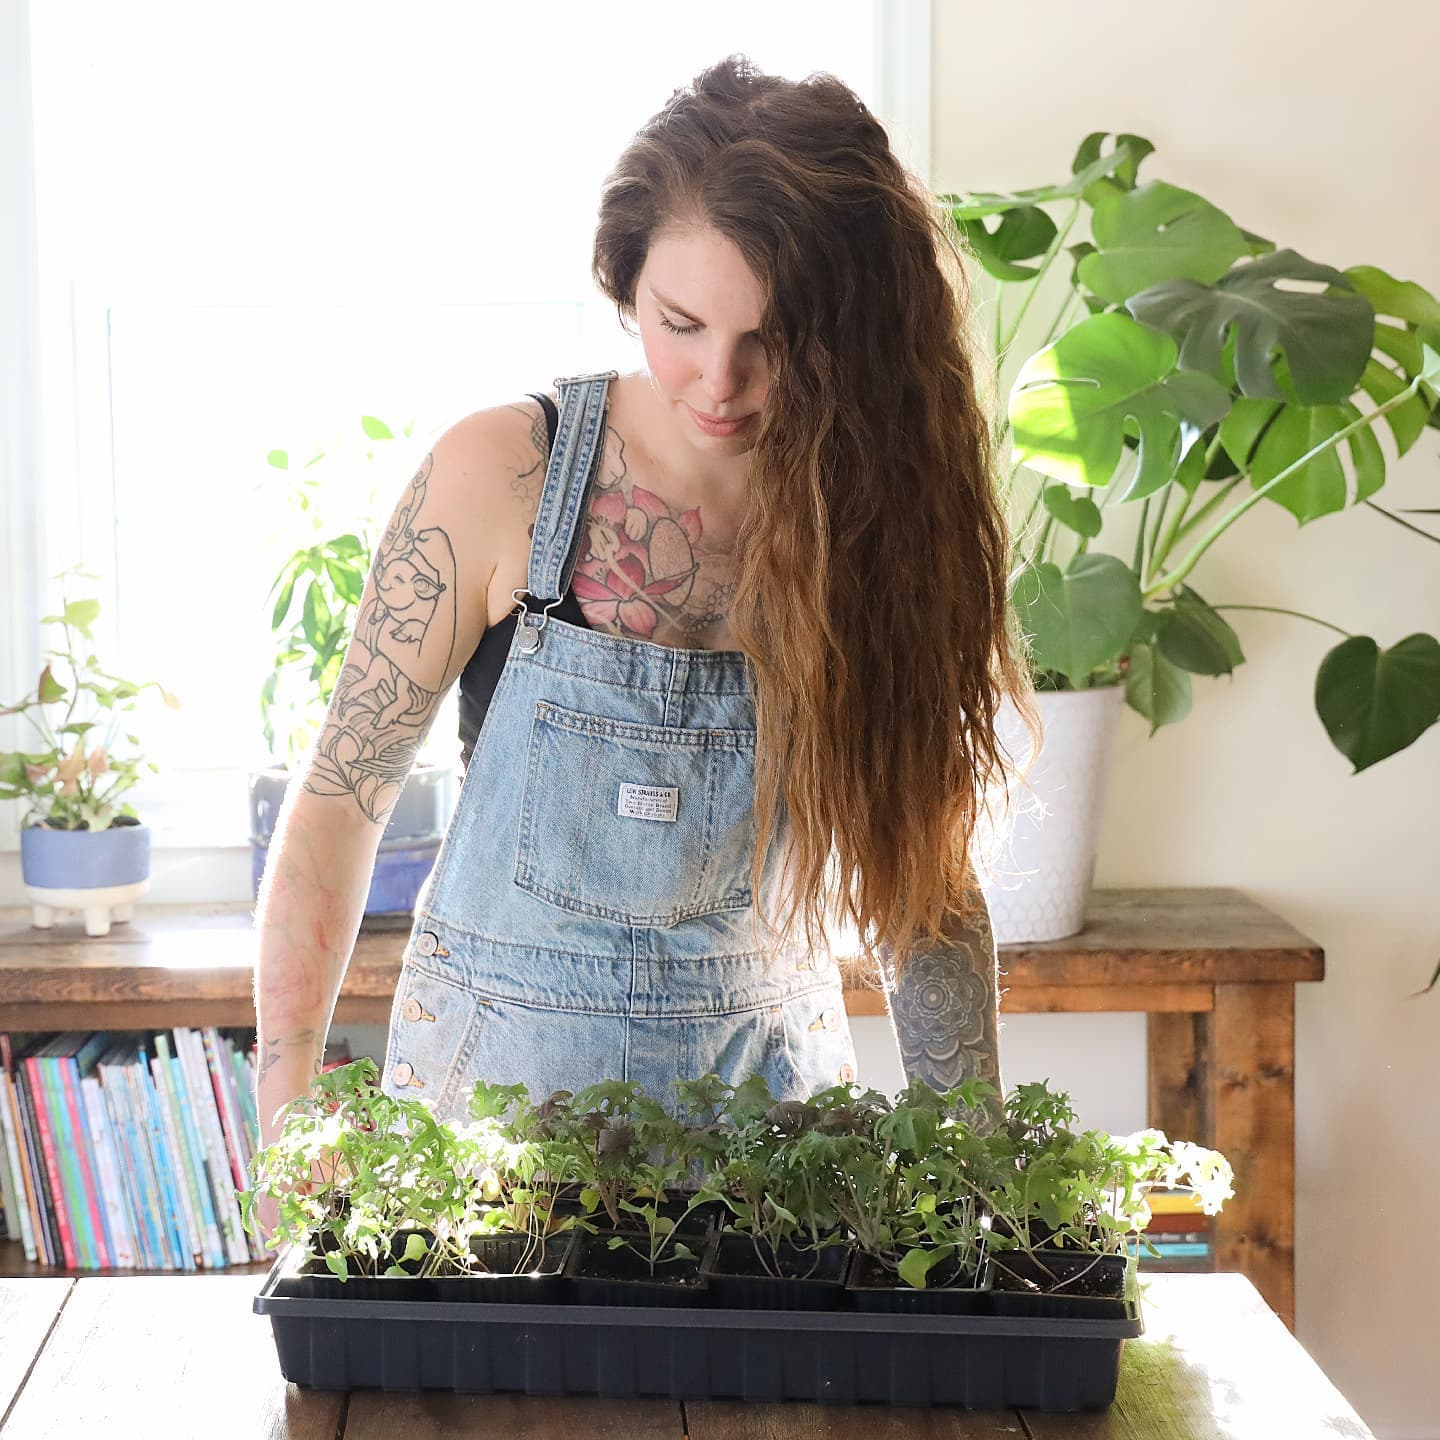 Amber recommends growing your own food to cut down on costs